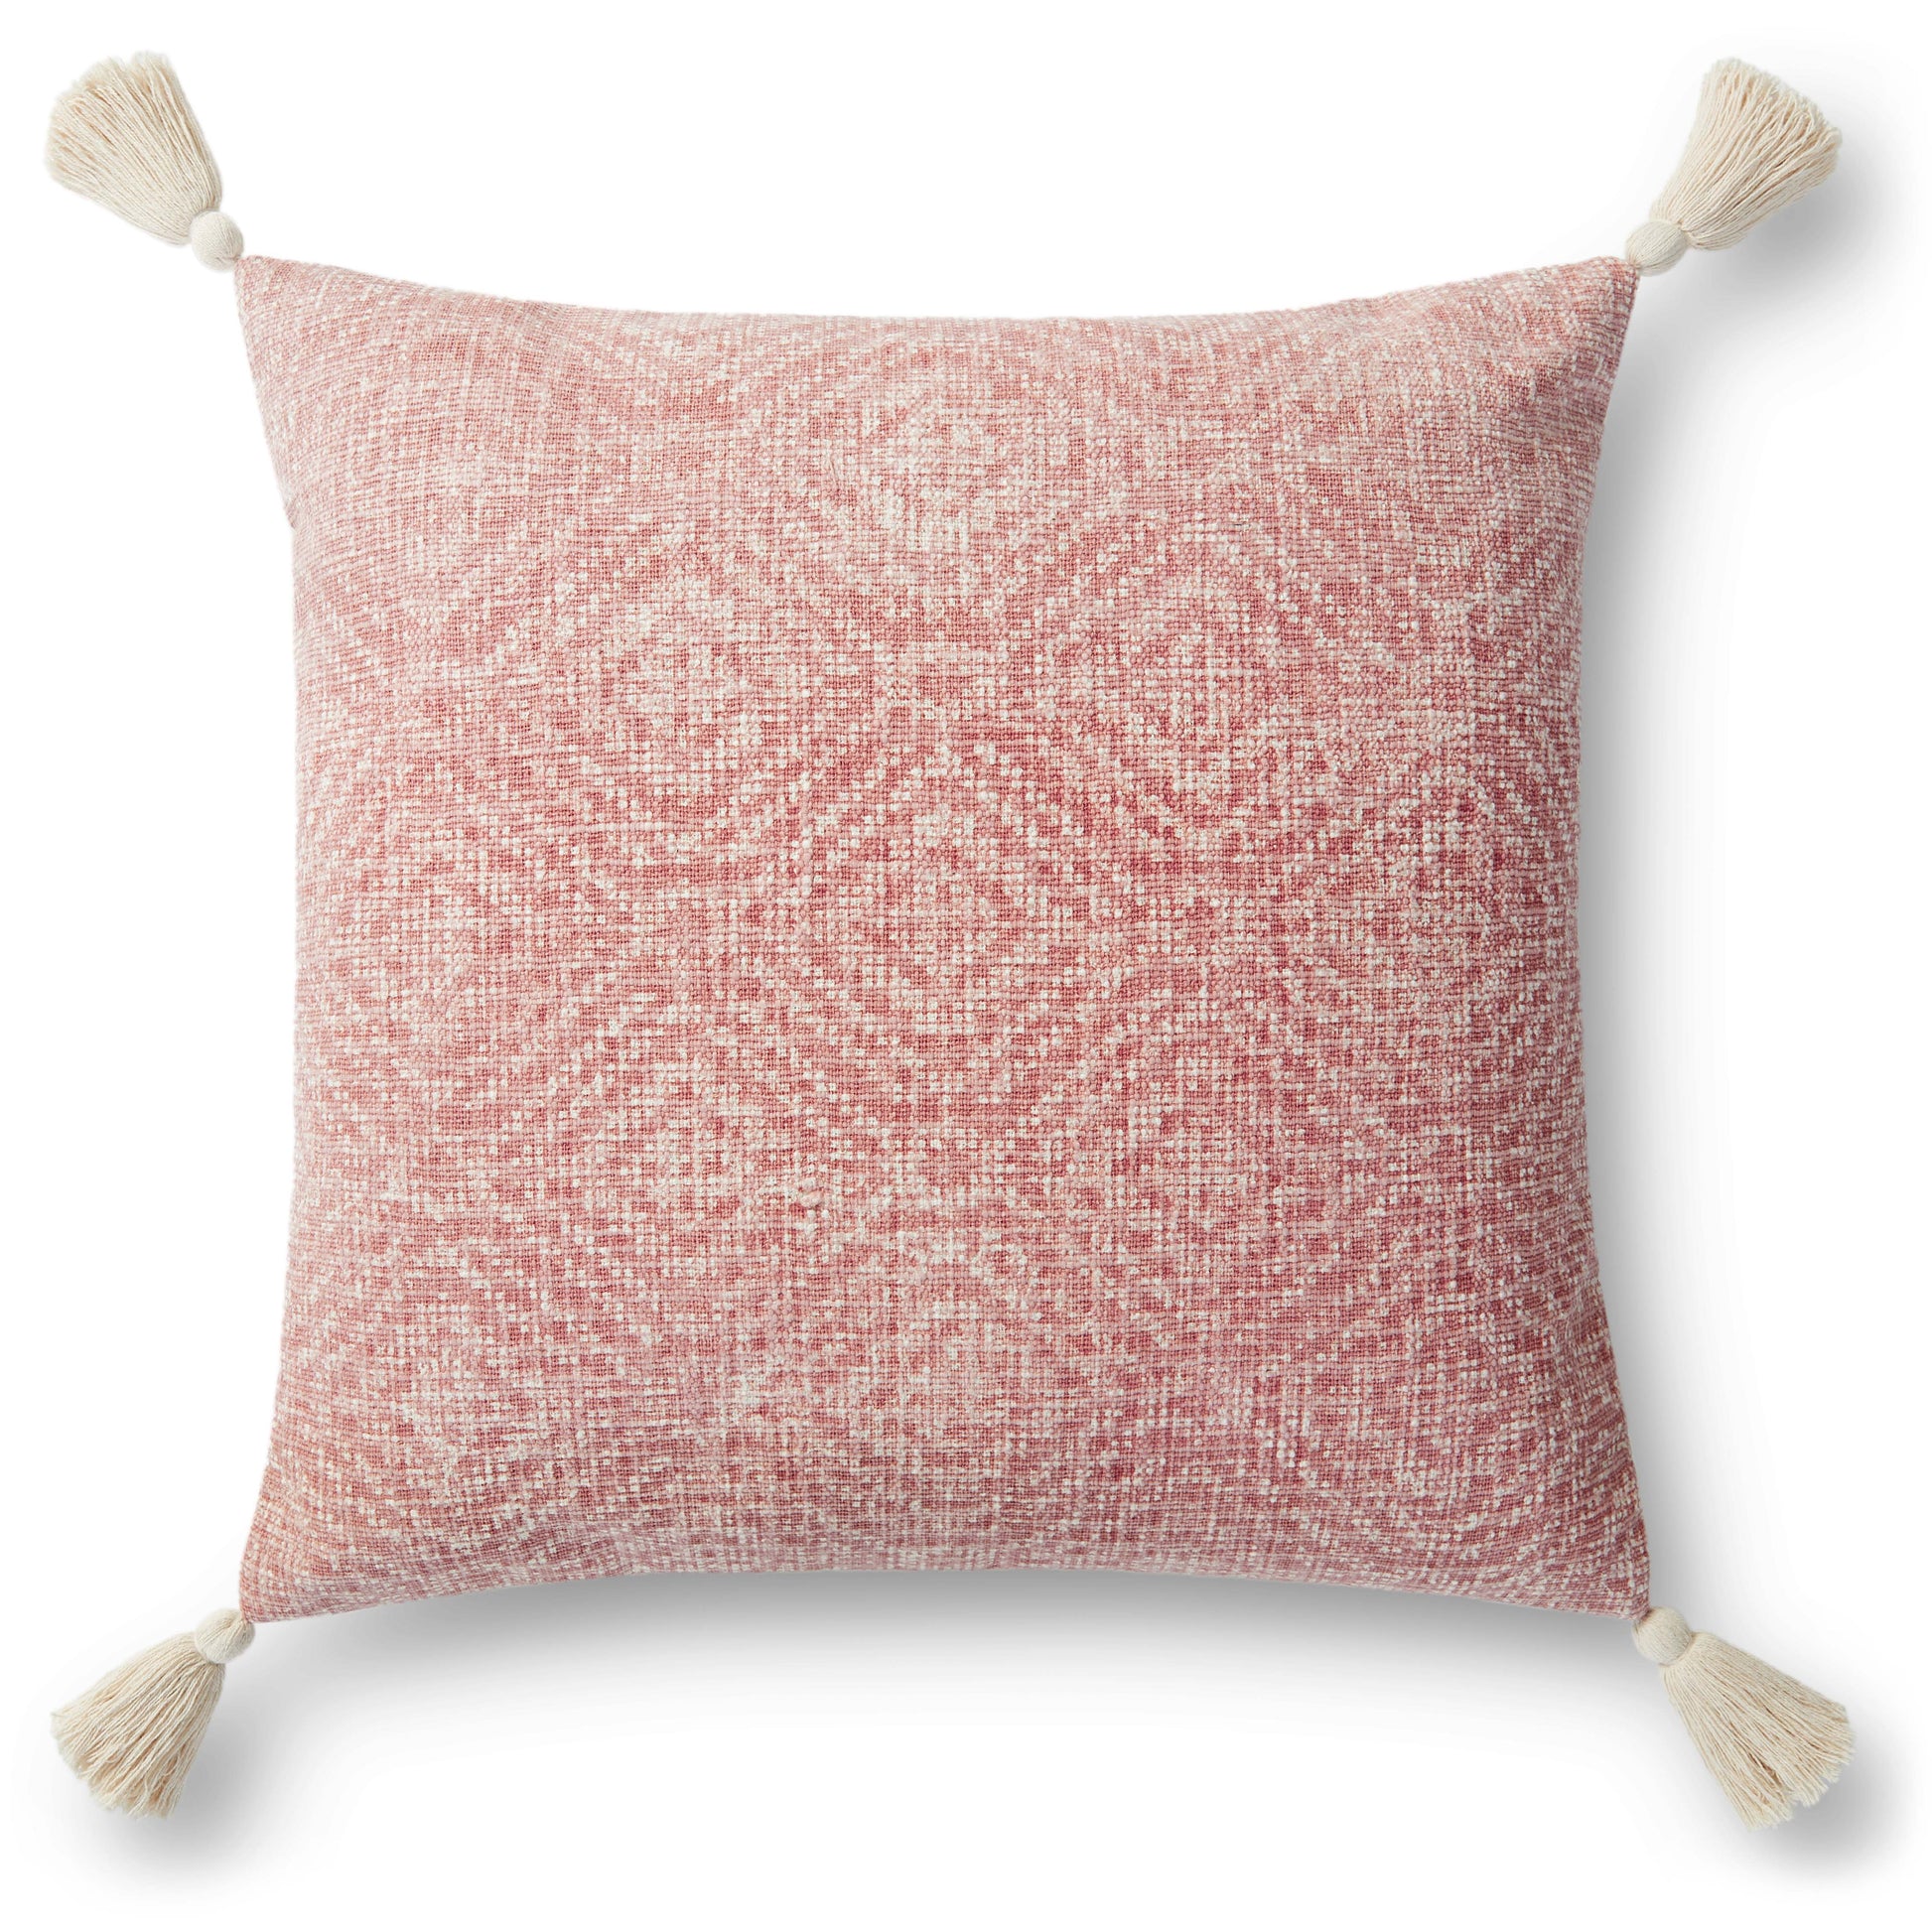 Photo of a pillow;  P0621 Pink 13" x 21" Cover w/Poly Pillow